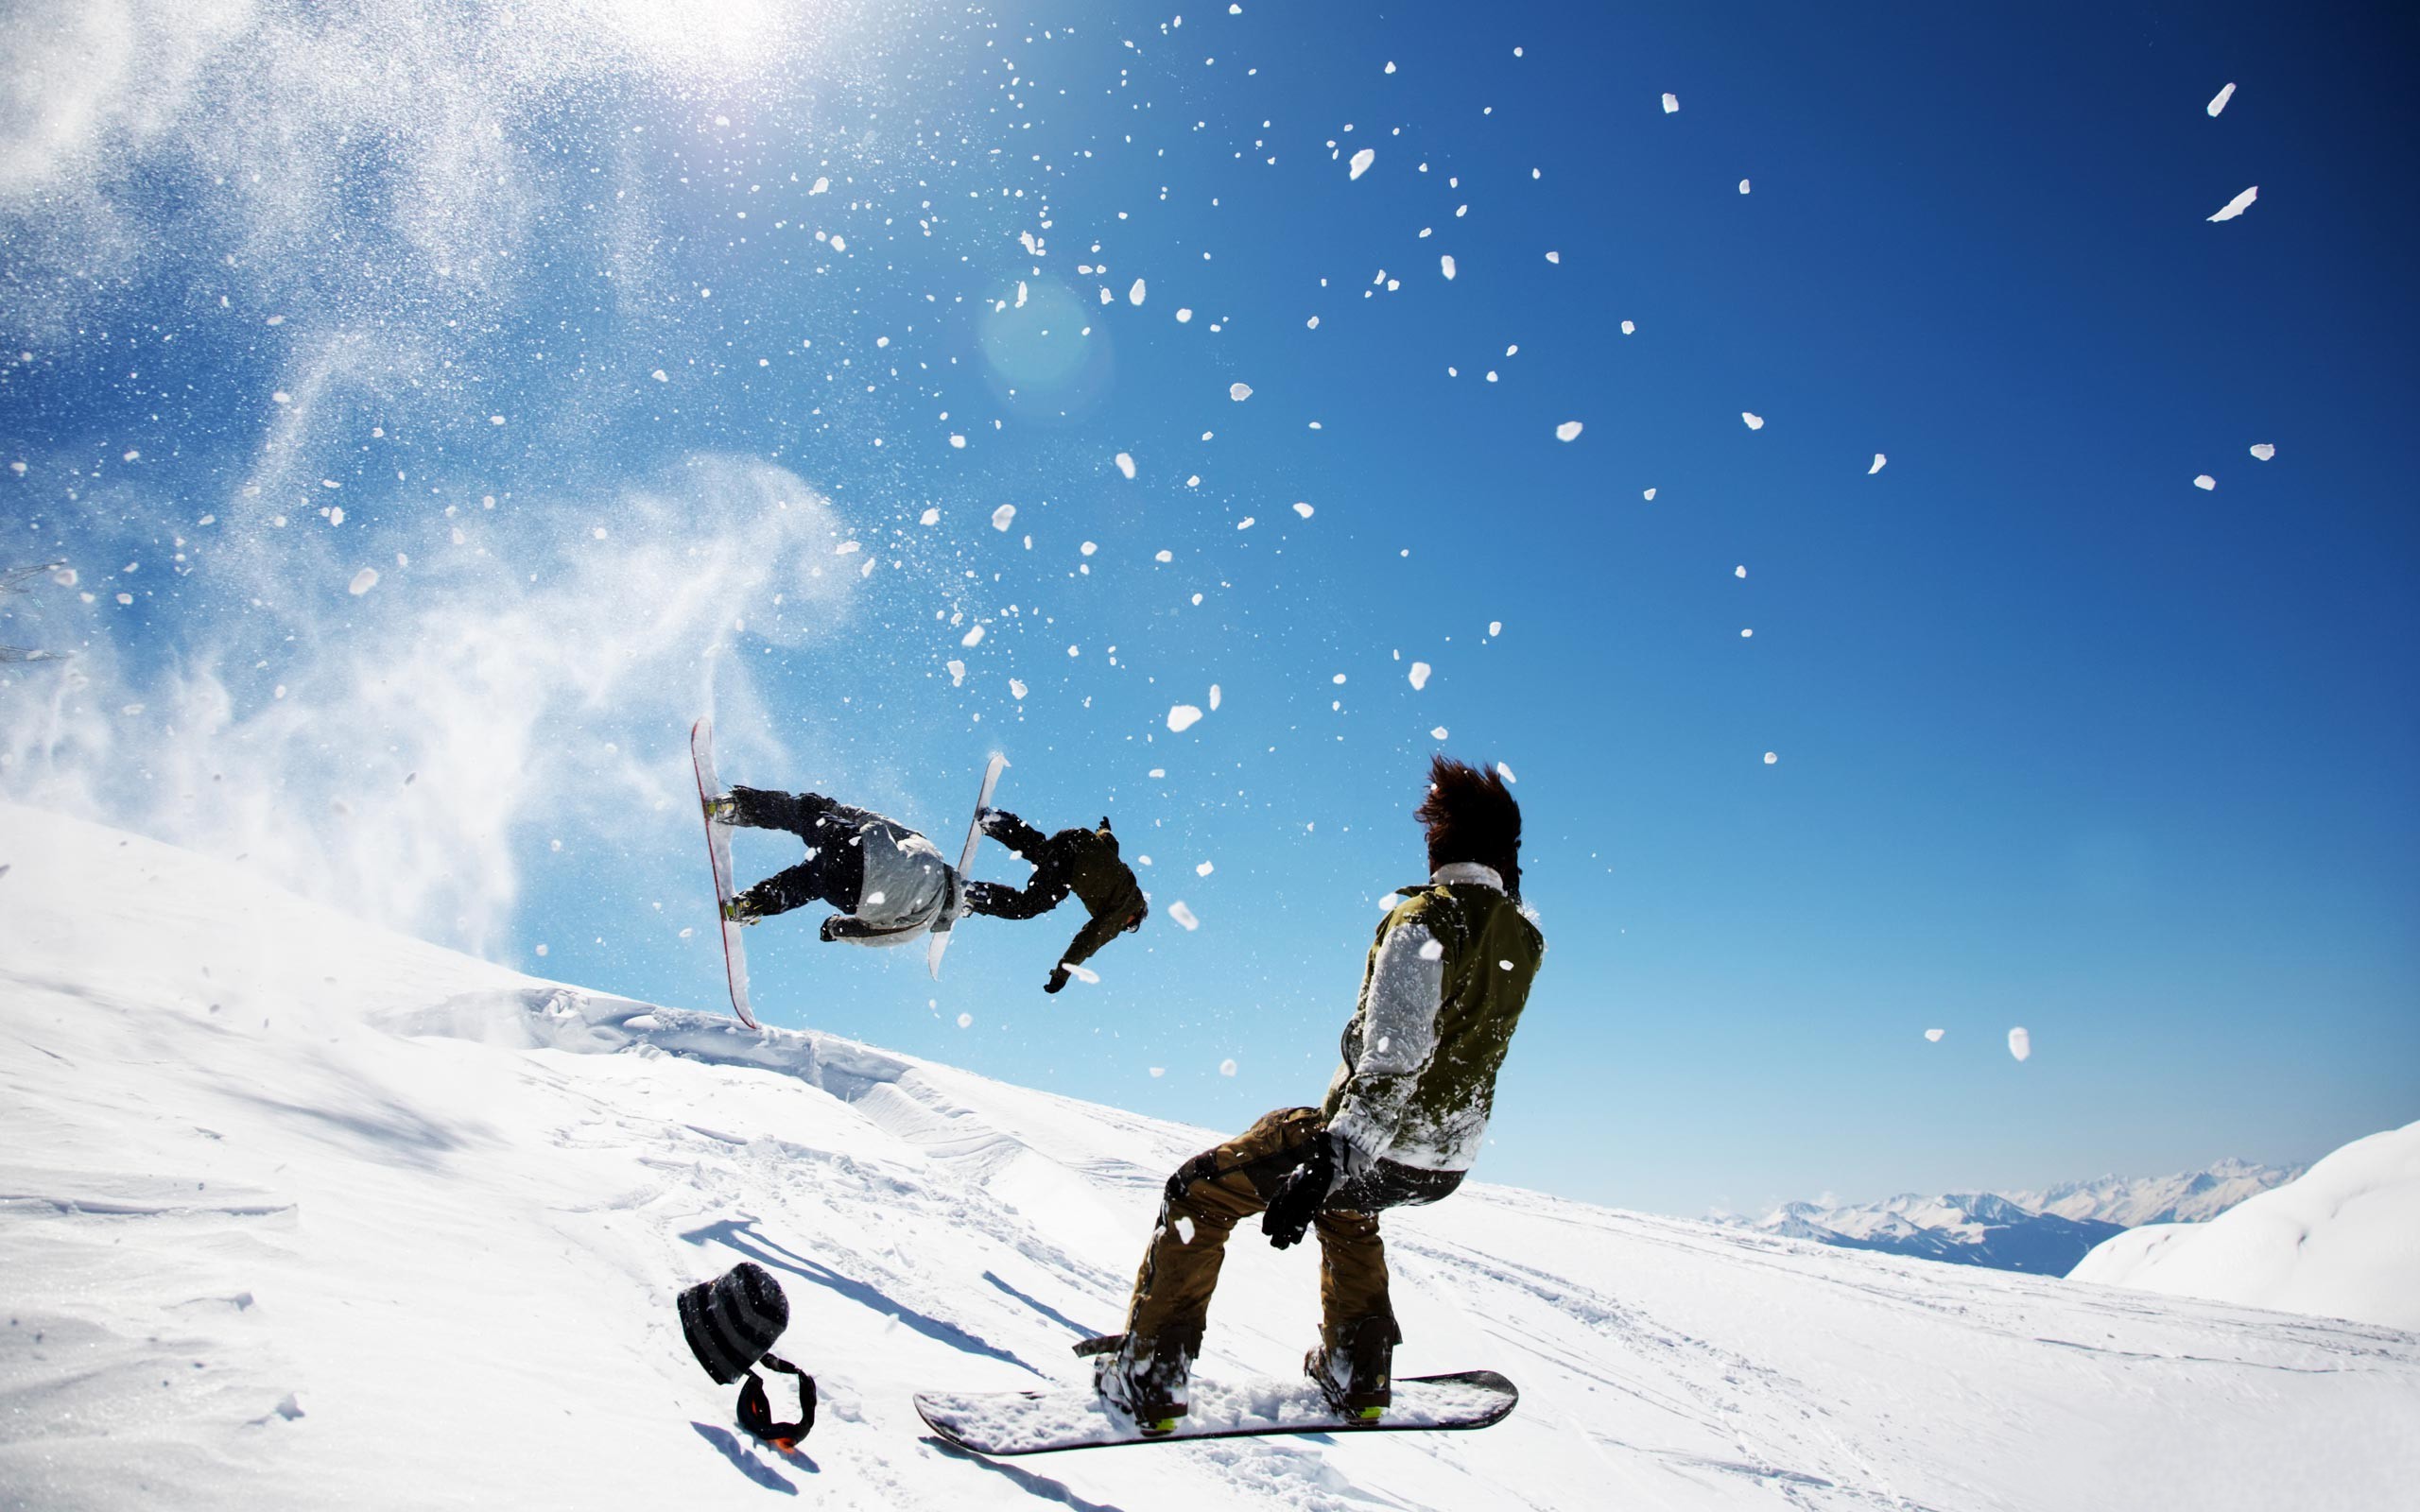 People 2560x1600 snowboarding snowboards sport jumping snow outdoors